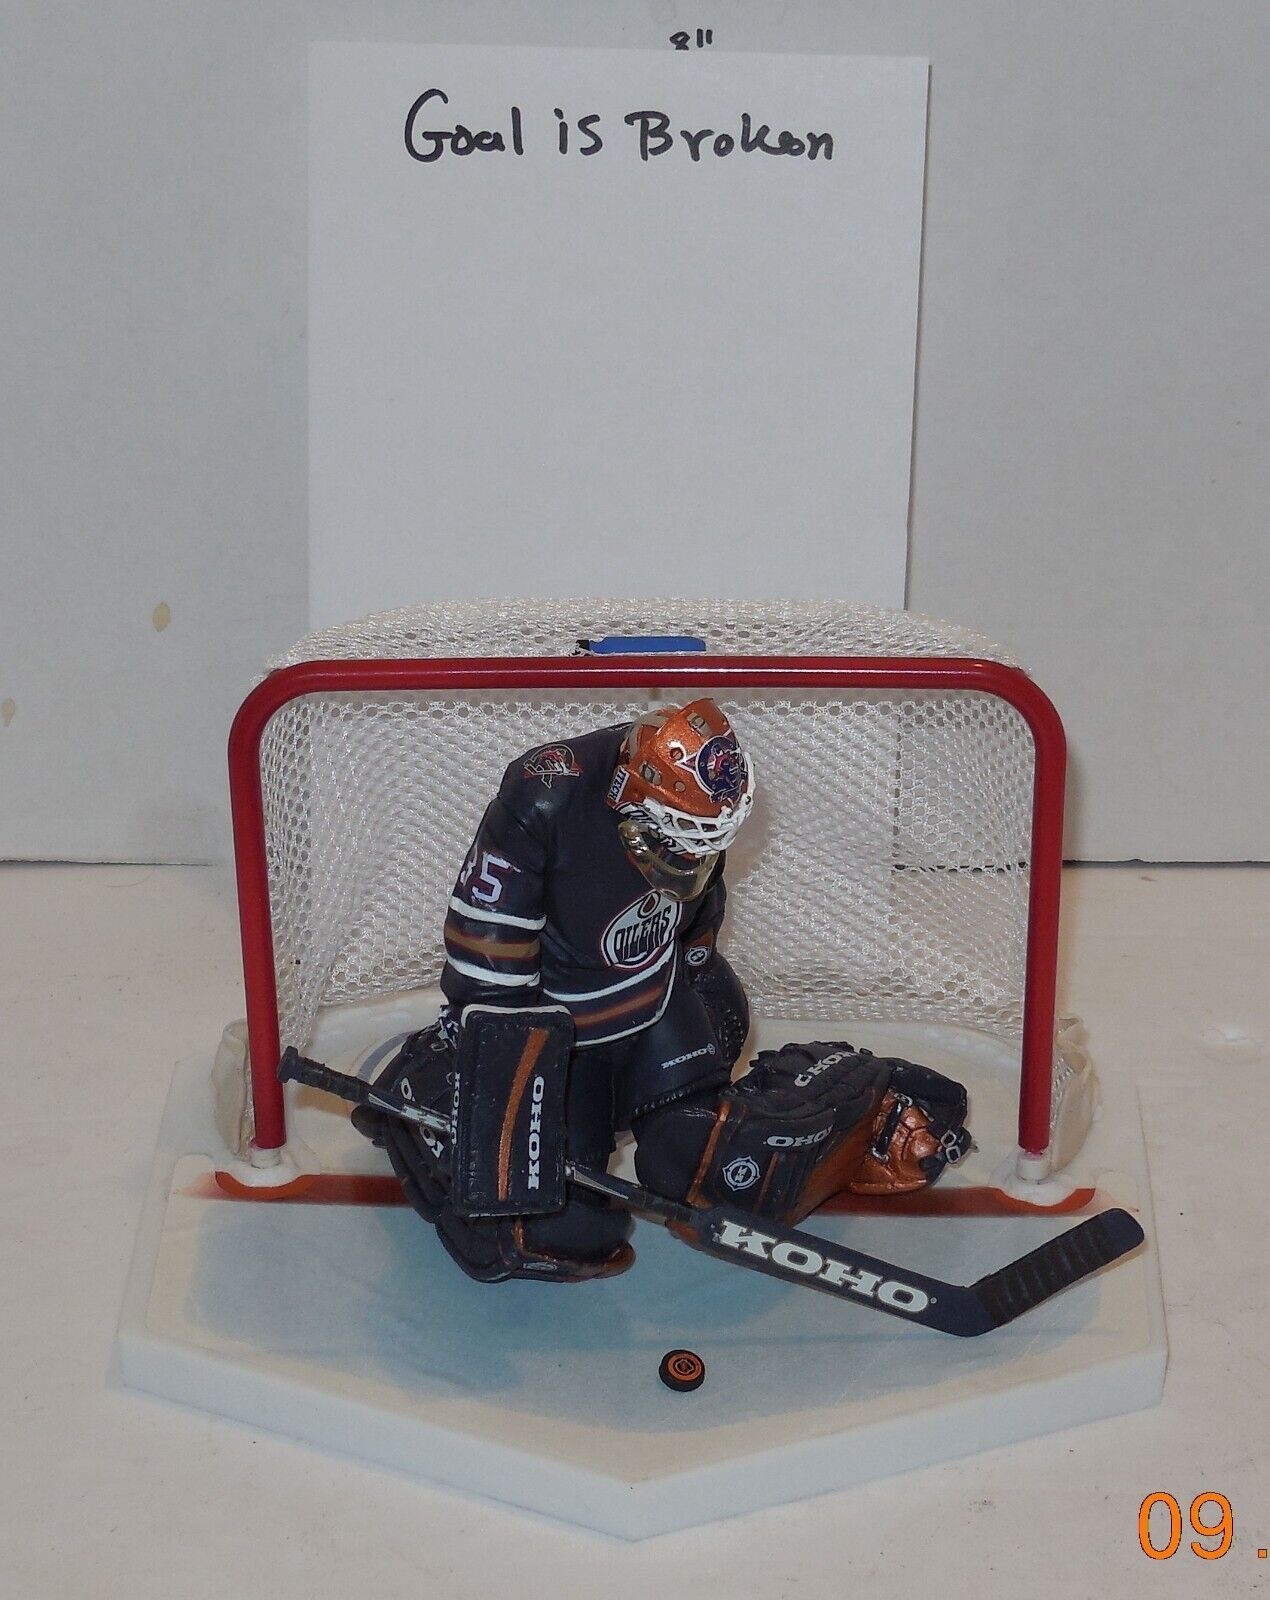 Primary image for McFarlane NHL Series 2 Tommy Salo Action Figure VHTF Oilers broken goal